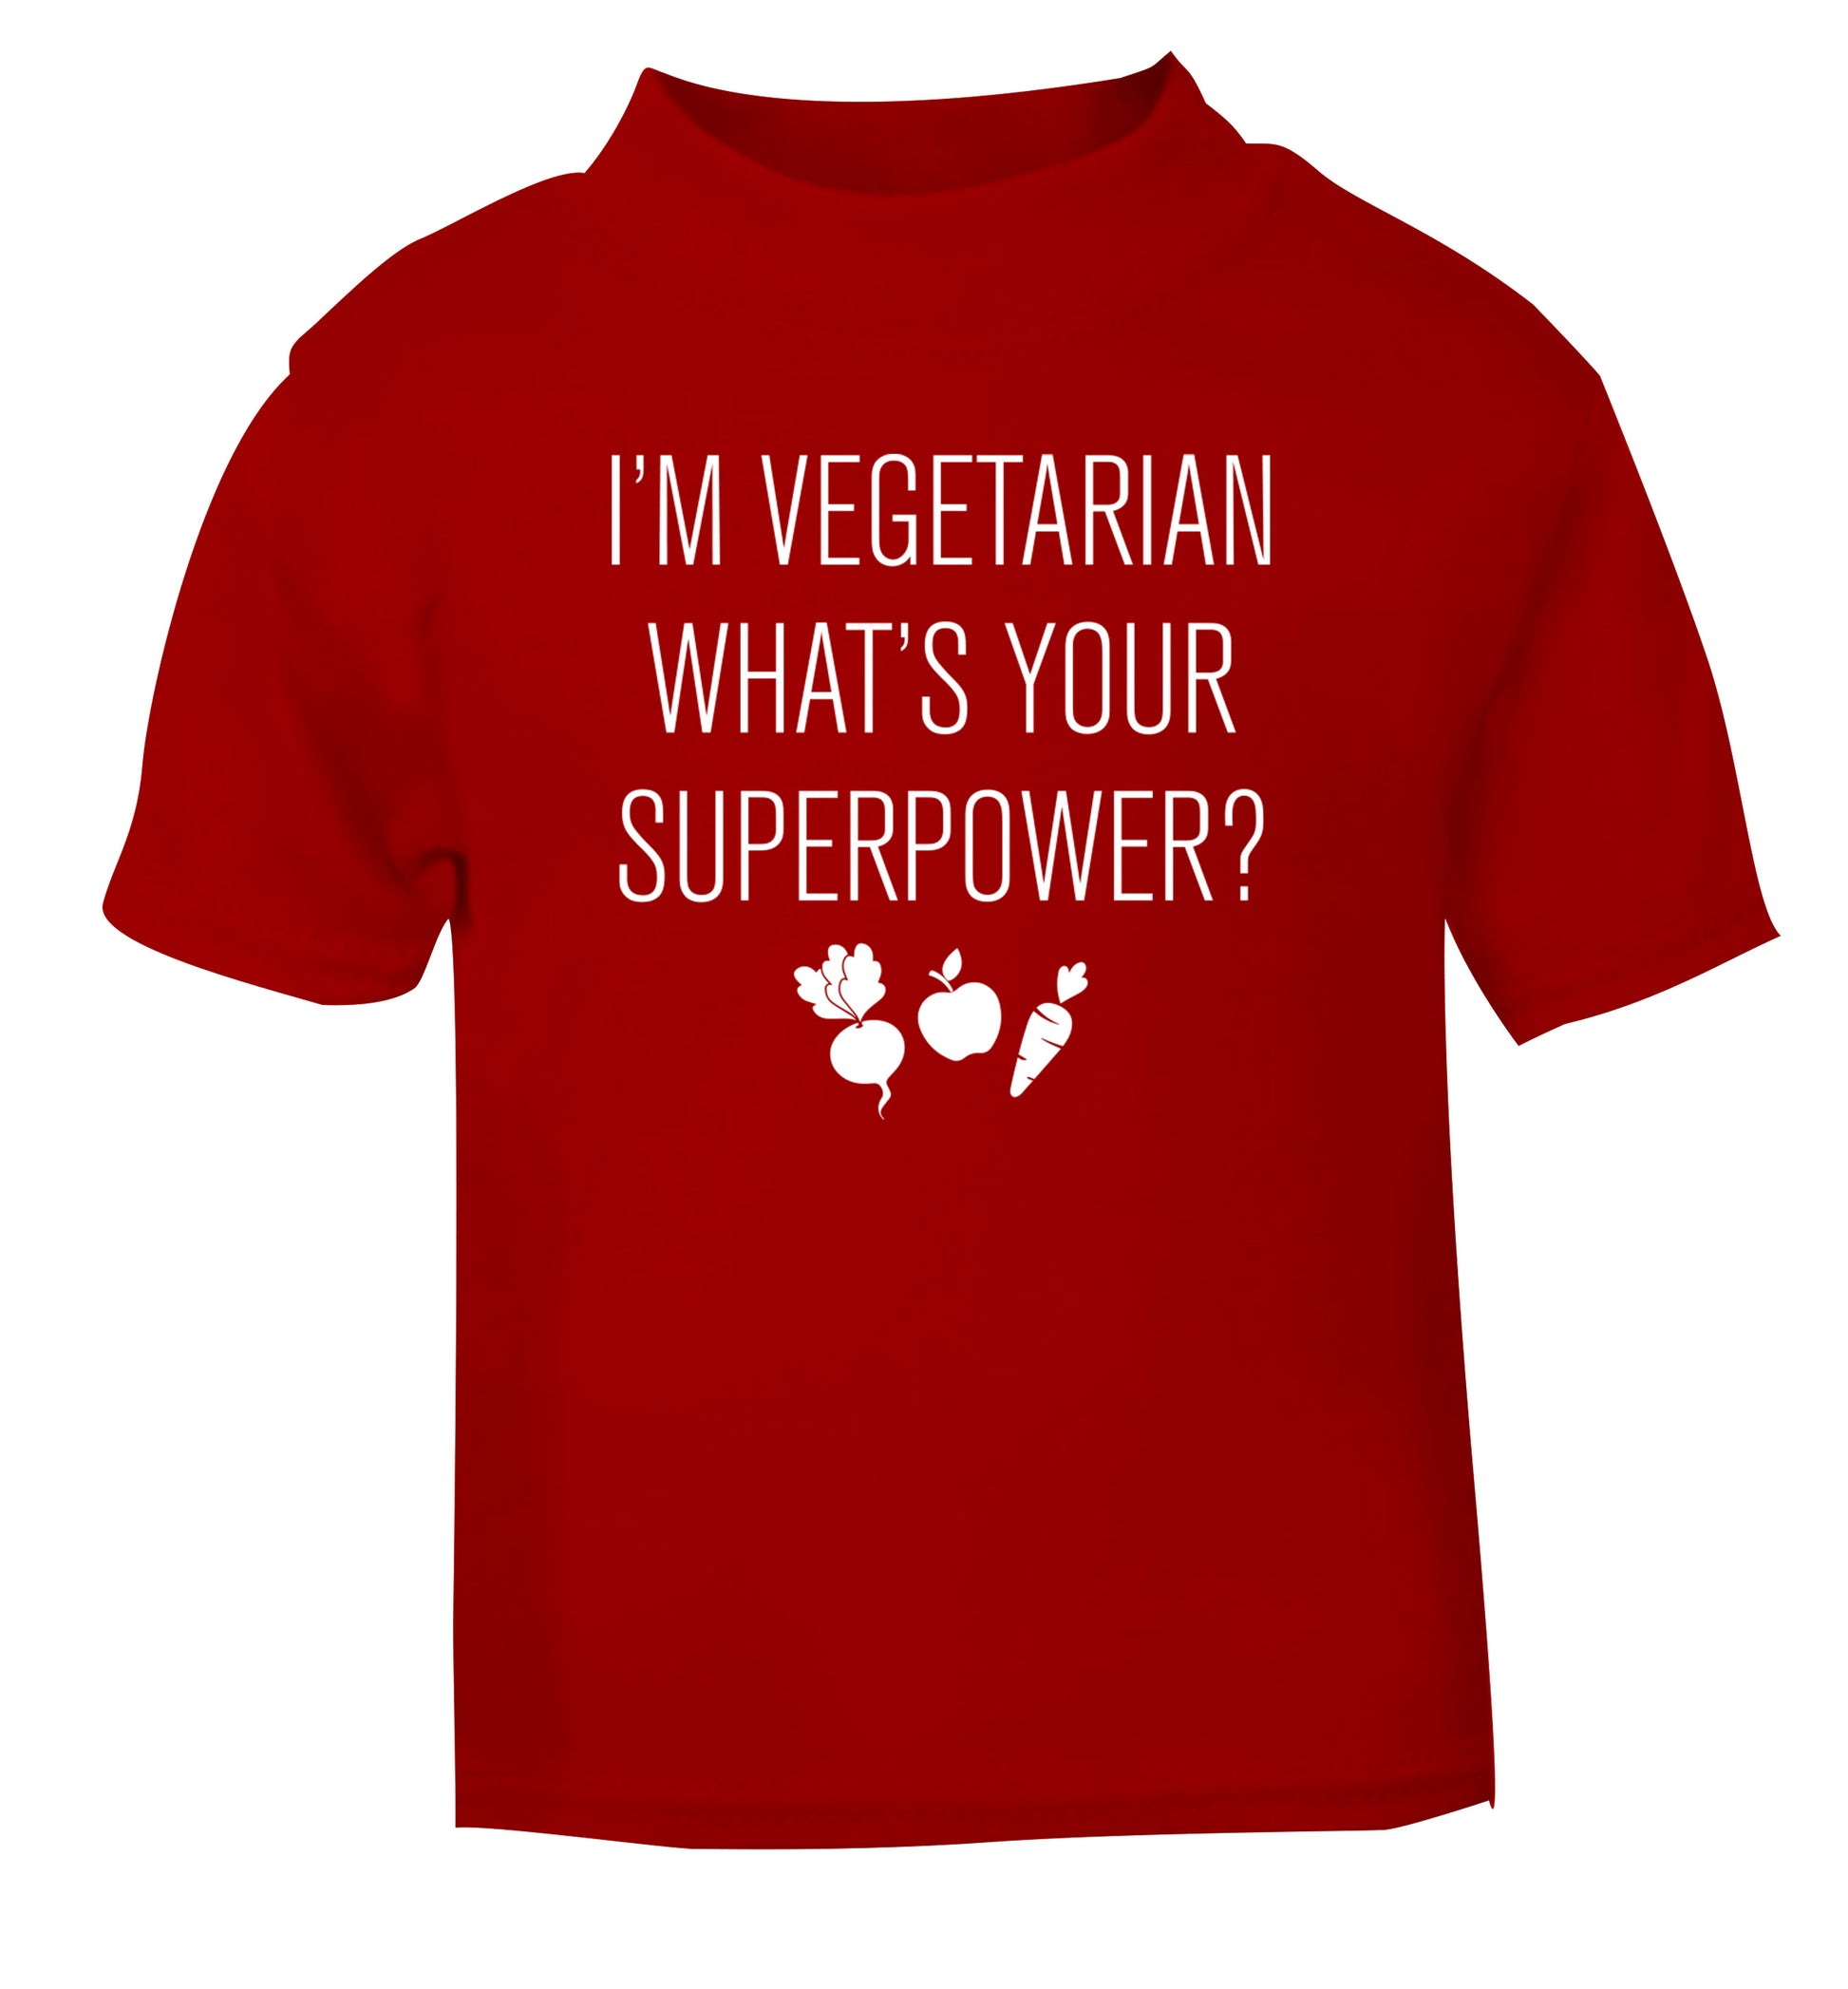 I'm vegetarian what's your superpower? red Baby Toddler Tshirt 2 Years